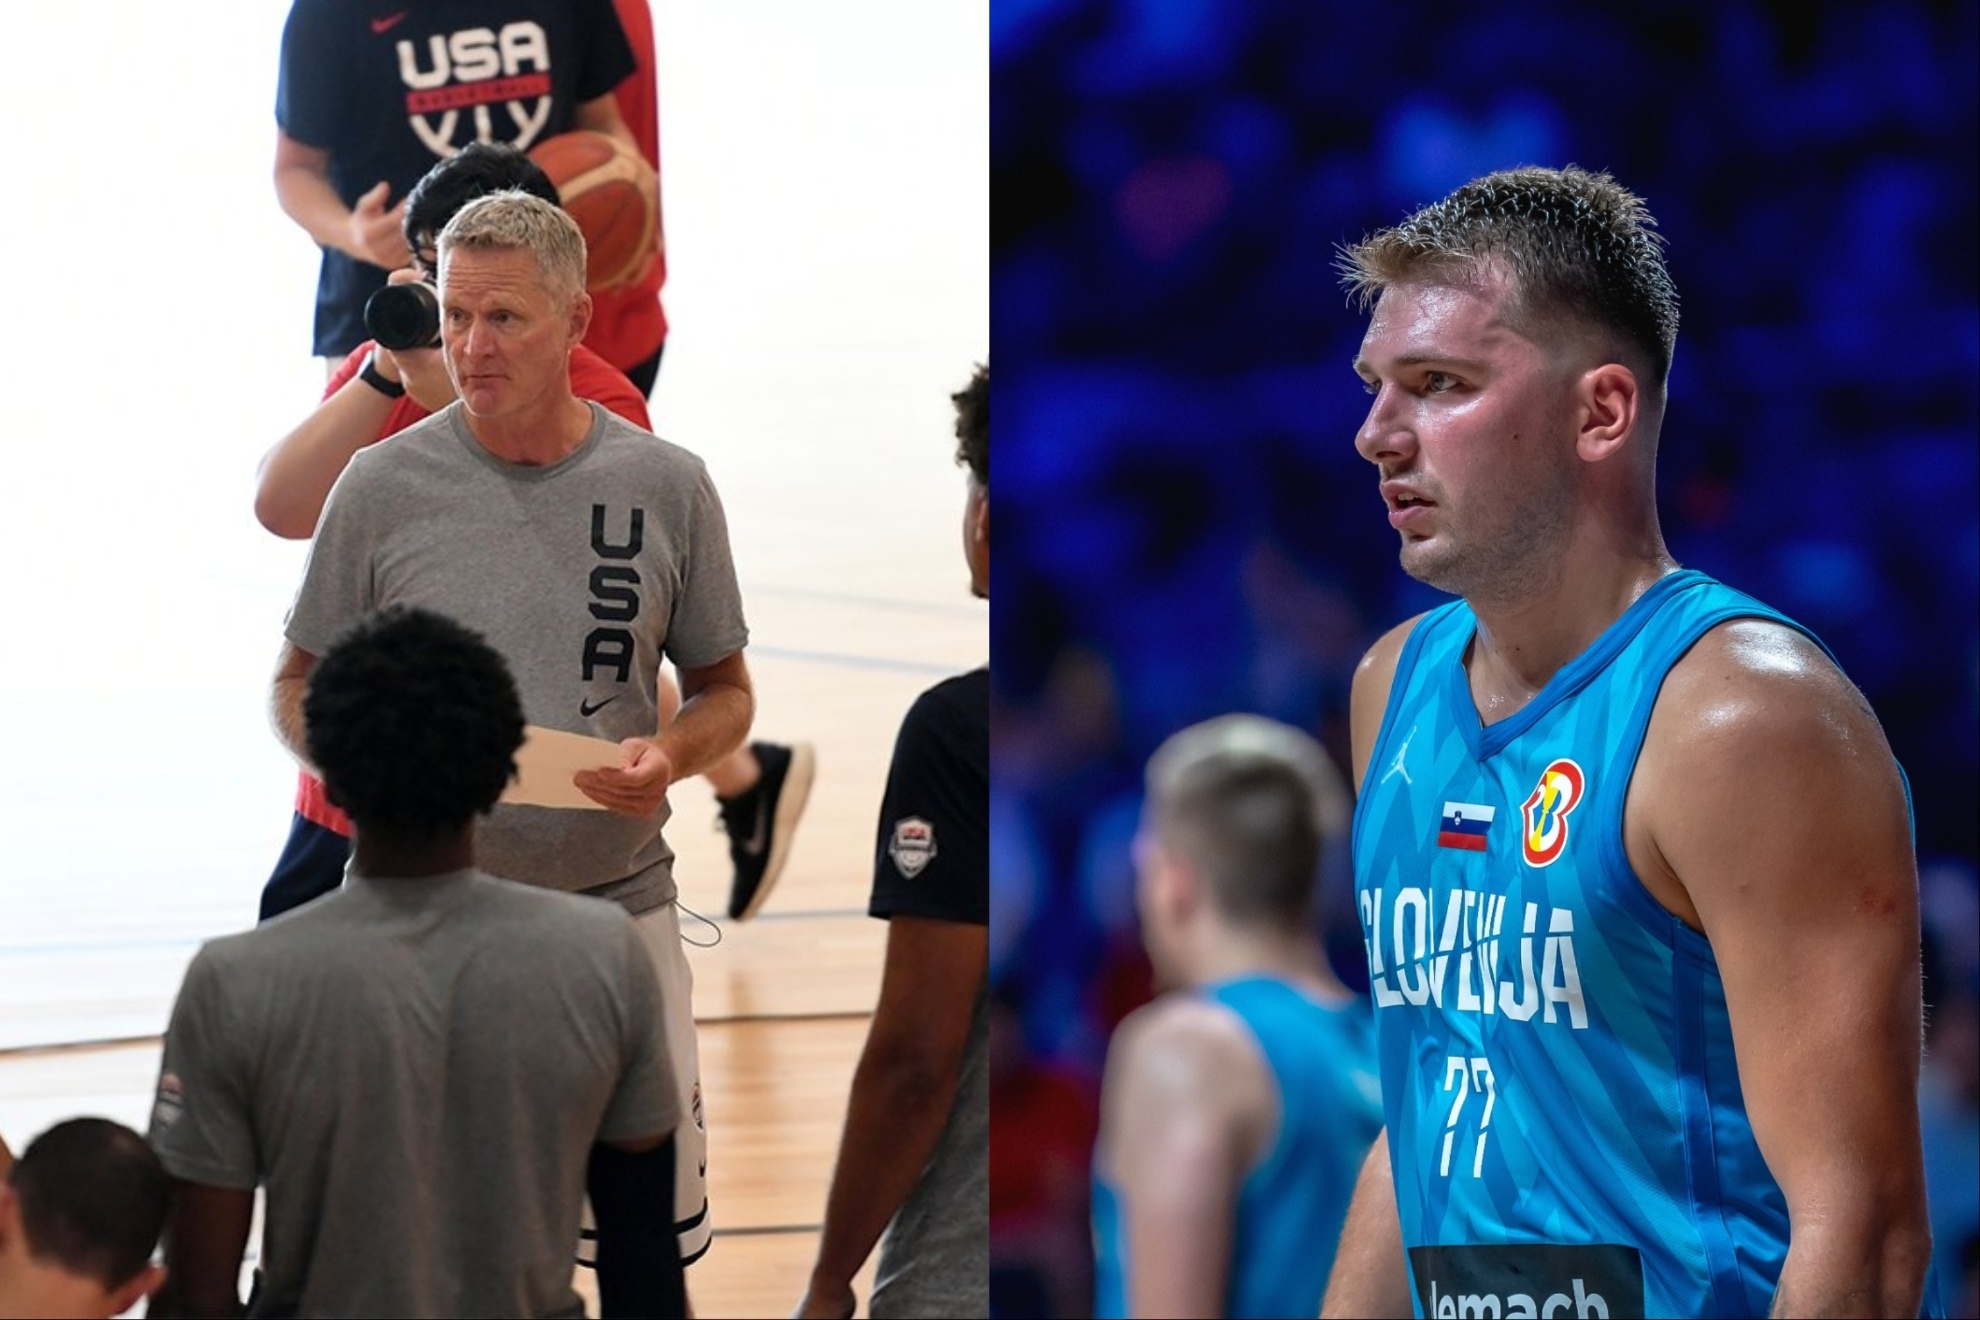 Mashup image of Coach Steve Kerr and Luka Doncic